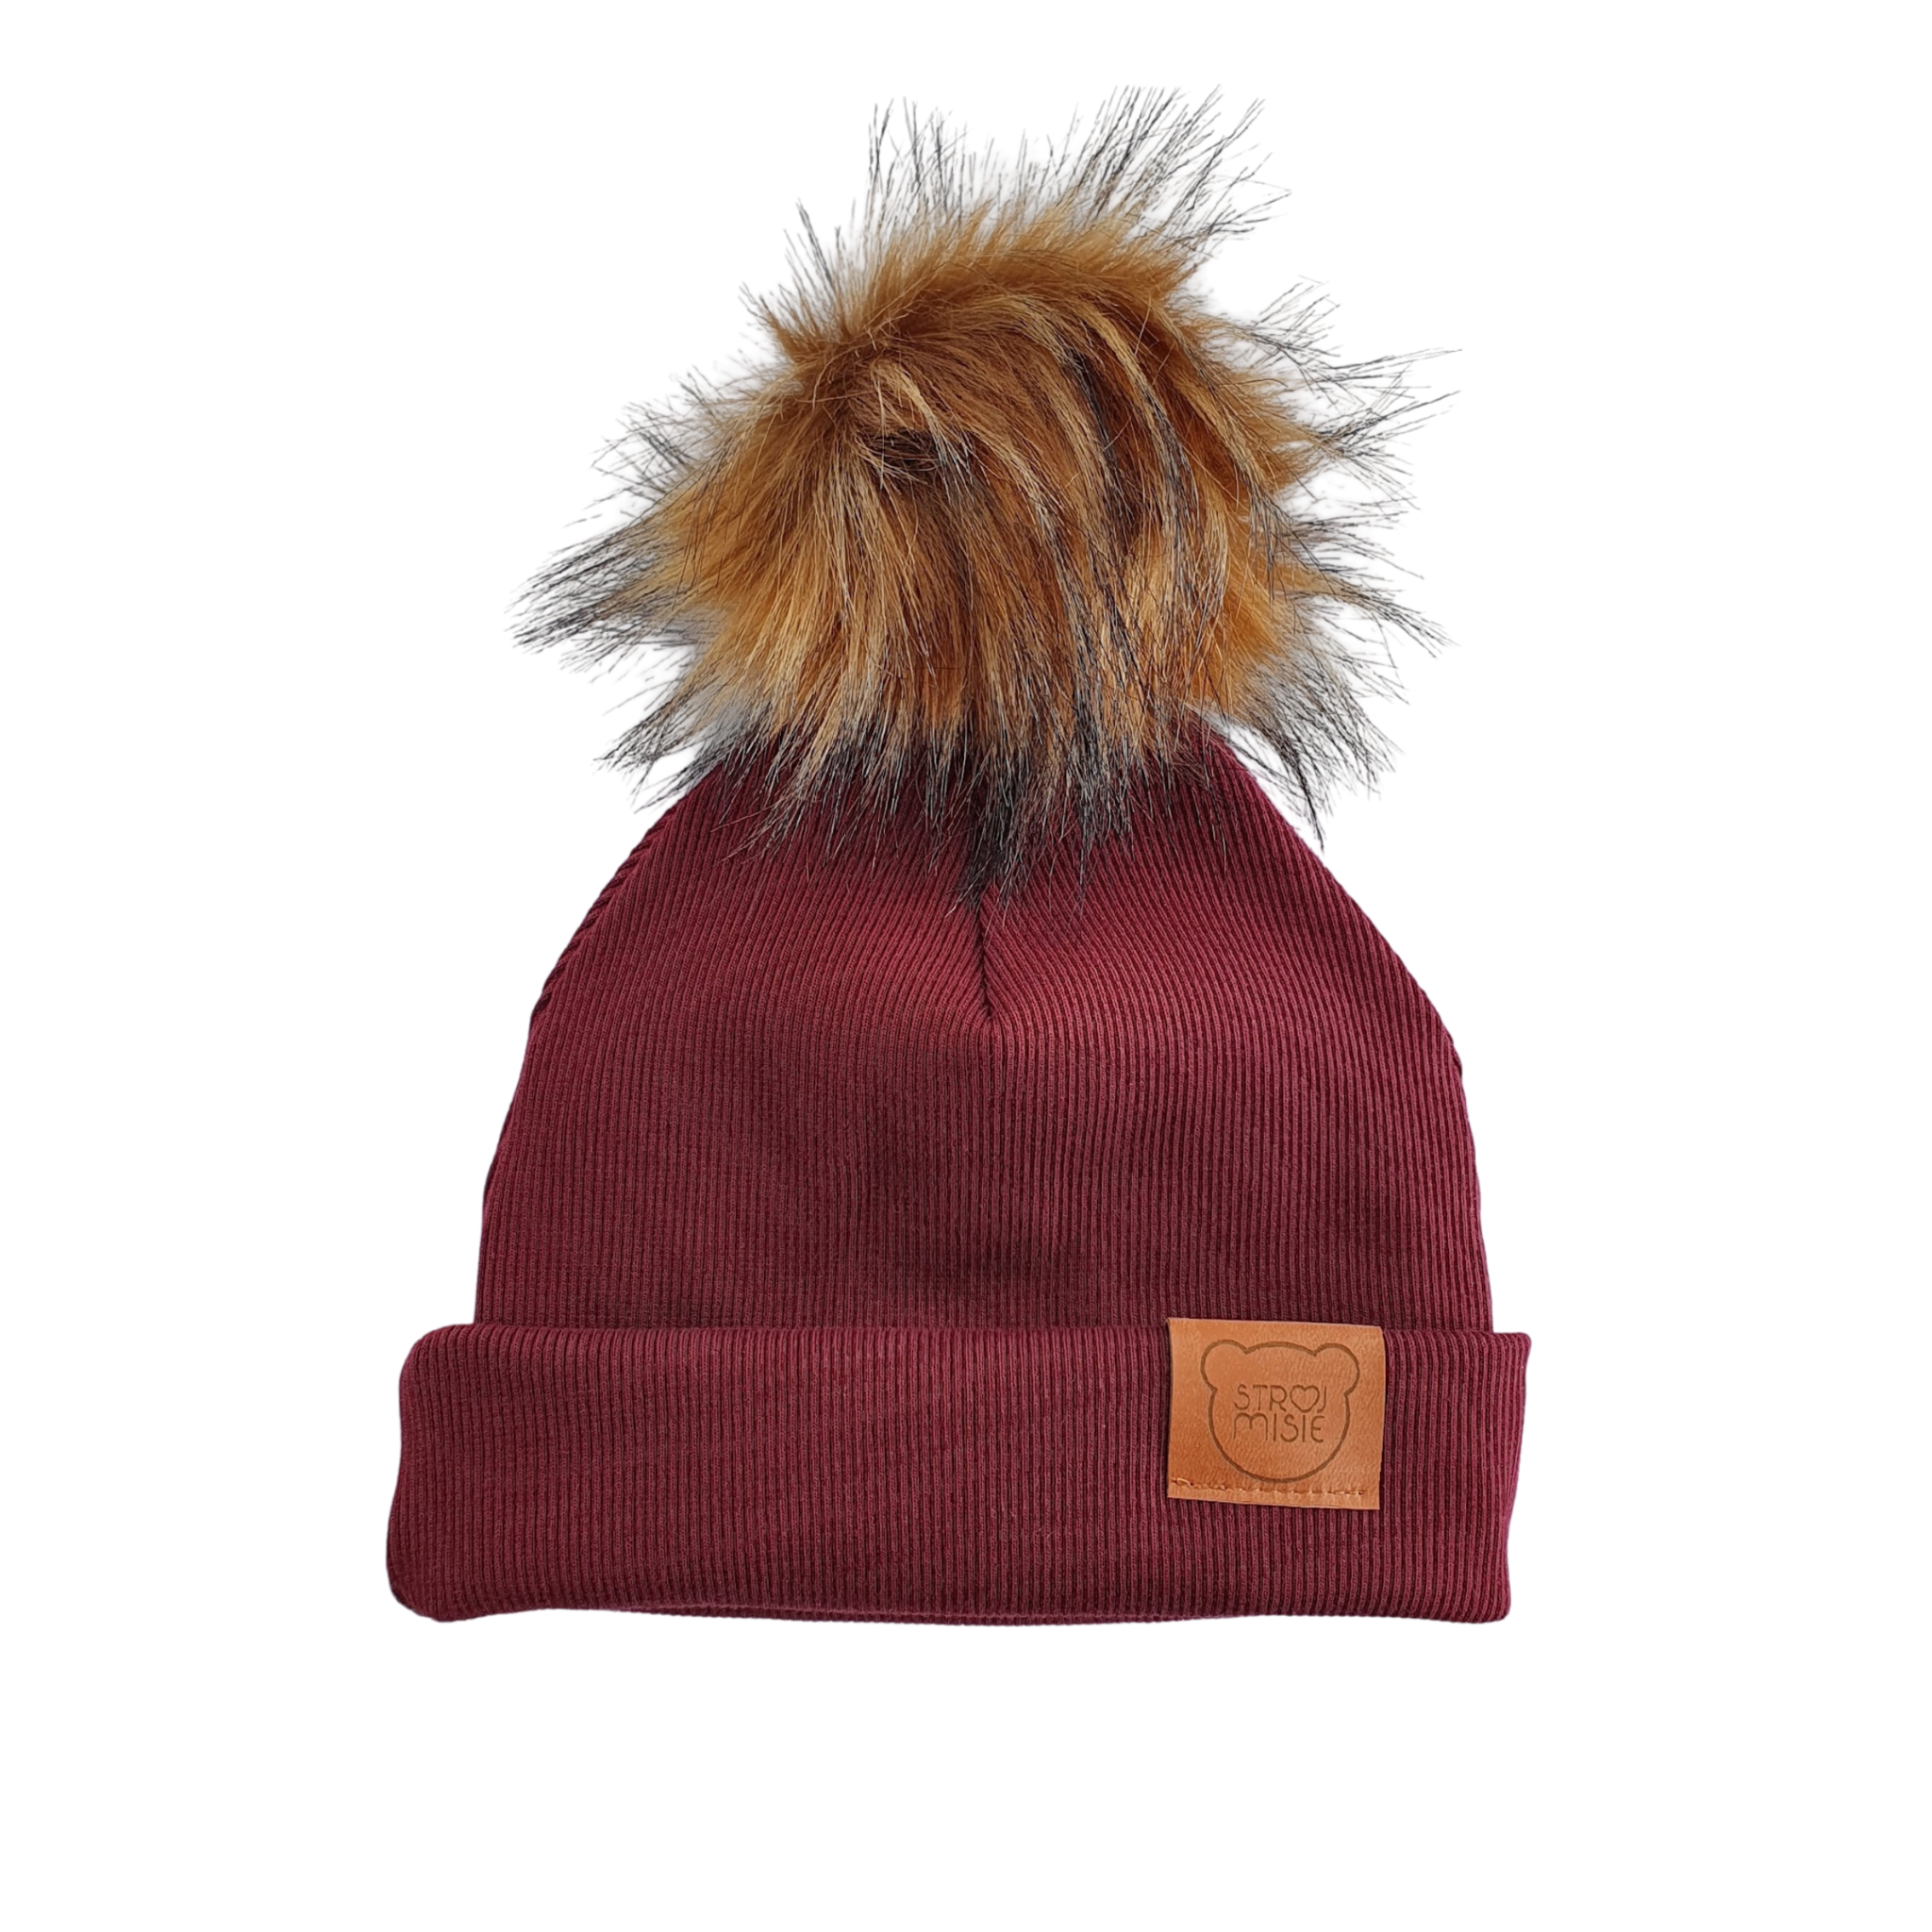 Strojmisie RED BEANIE WITH POM | KIDS HAT BORDEAUX | BABY HAT BORDEAUX RED